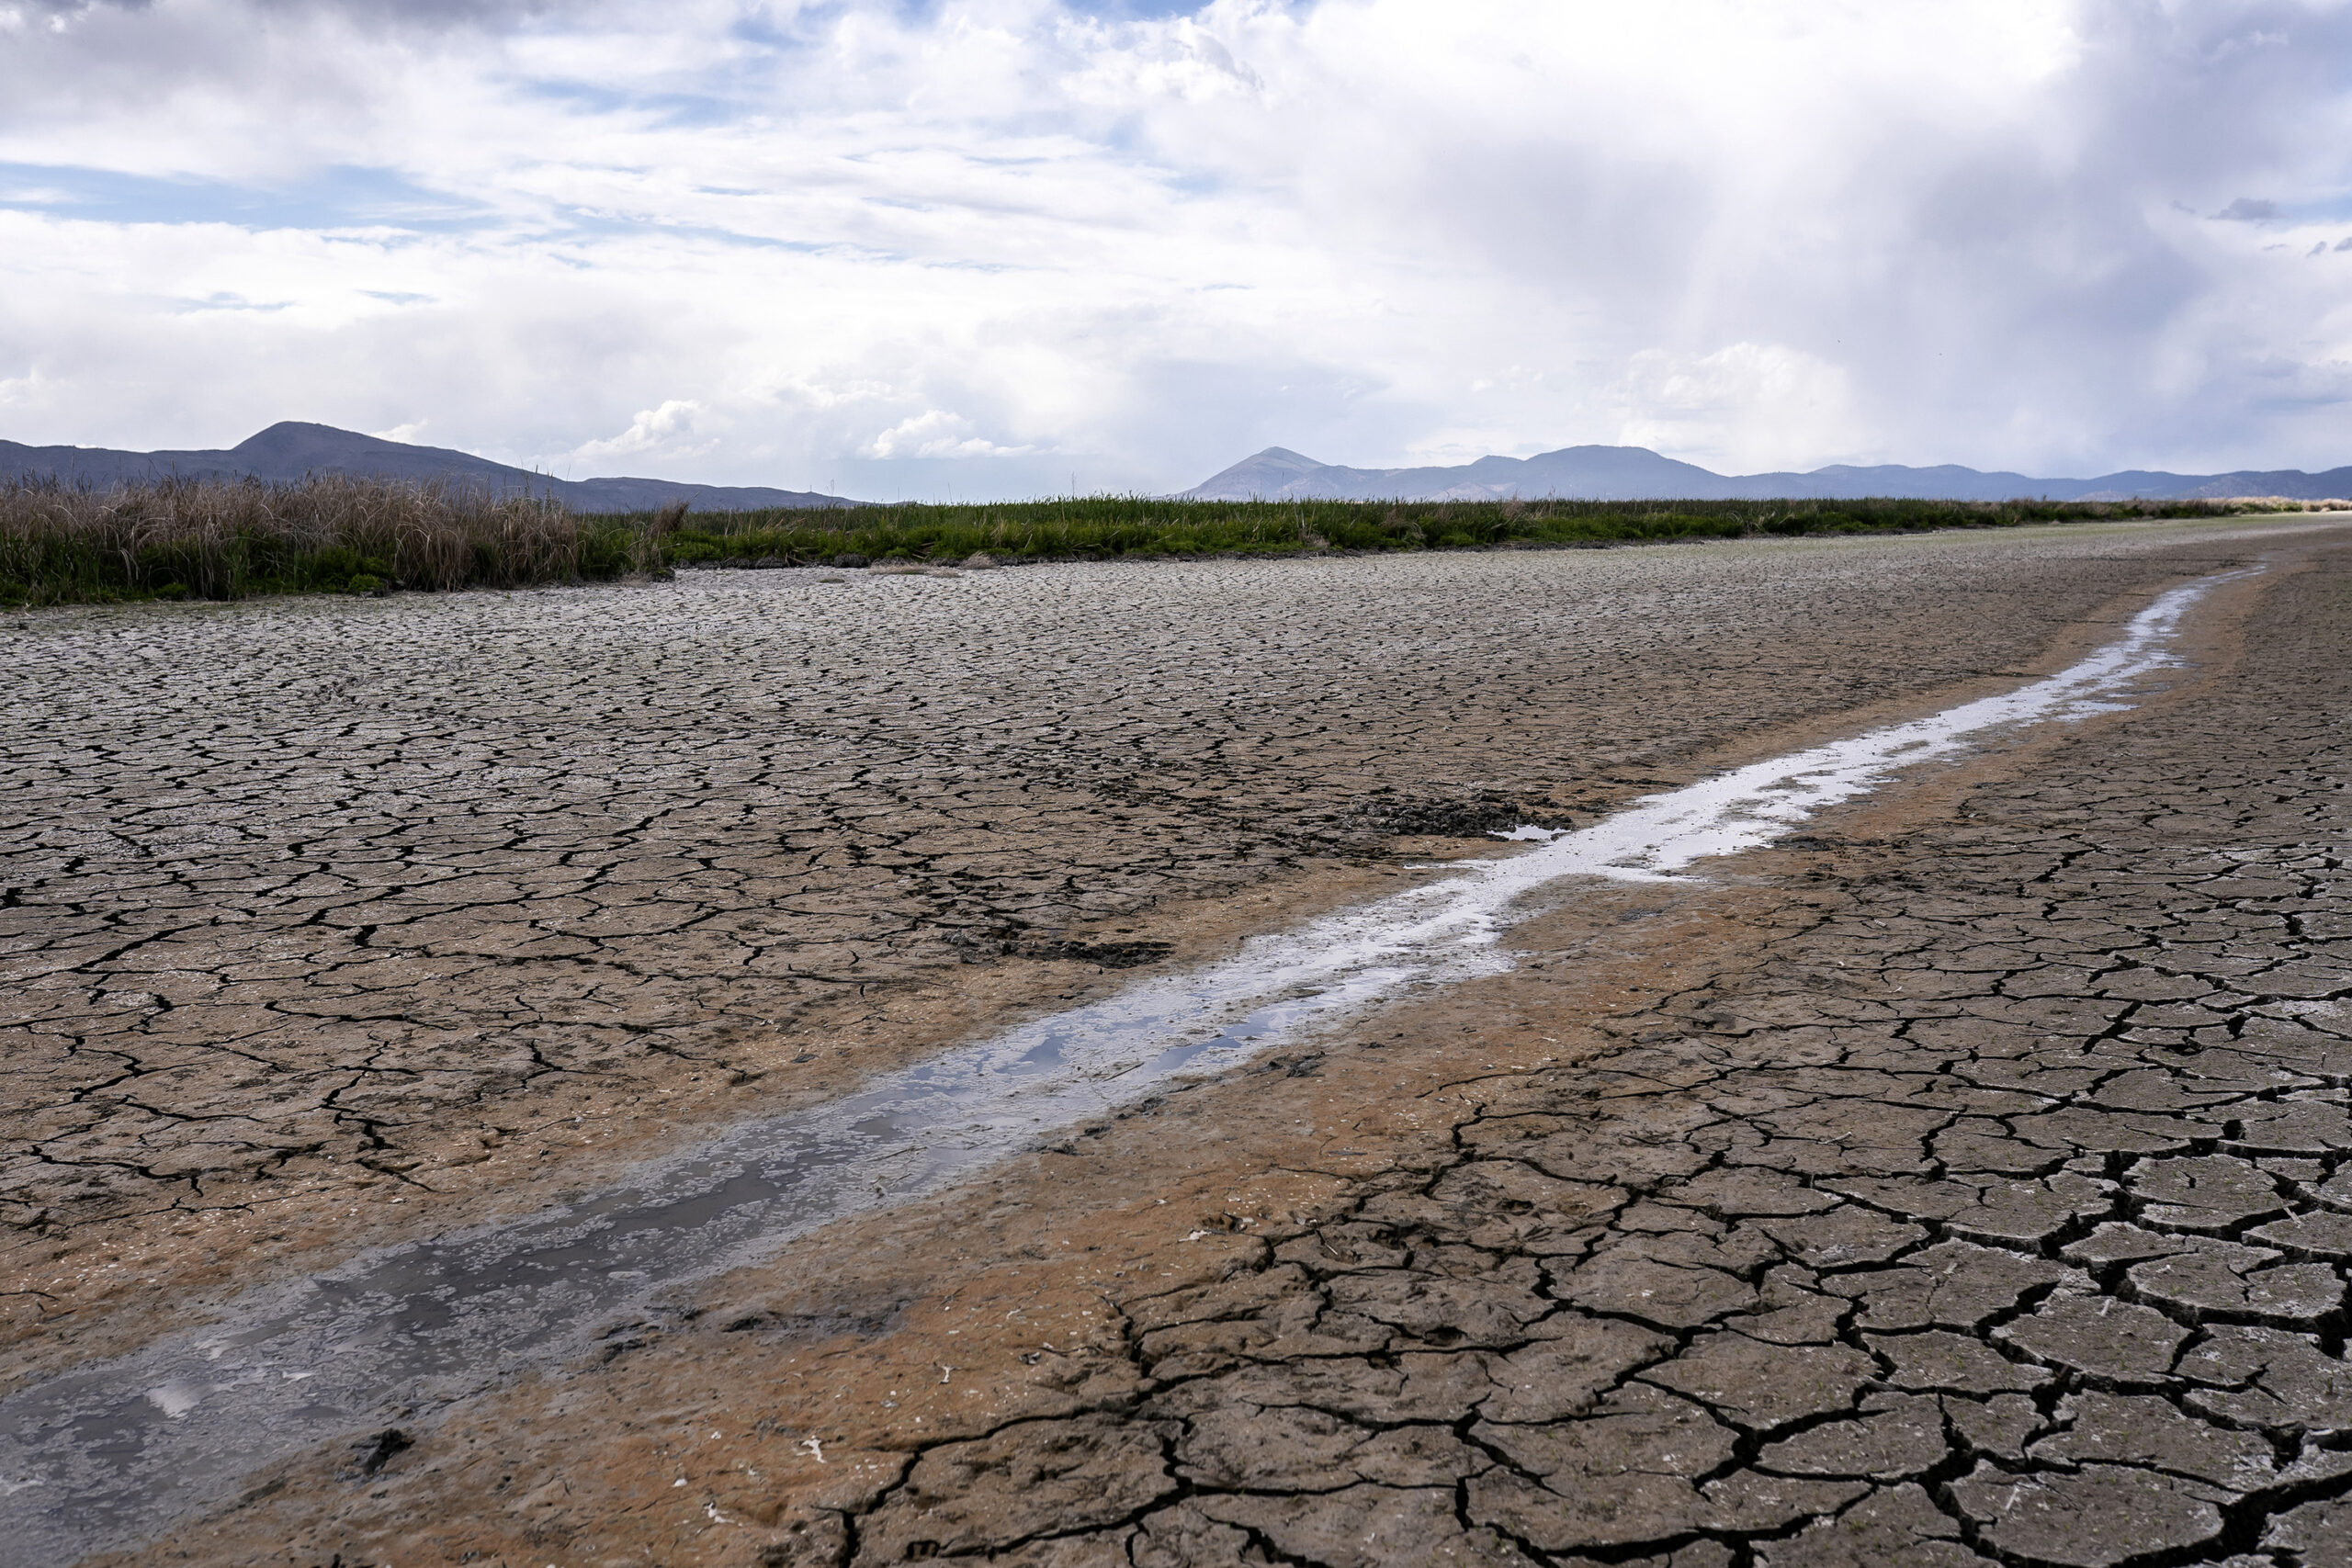 FILE - A small stream runs through the dried, cracked earth of a former wetland near Tulelake, Calif., on June 9, 2021. Southern California's gigantic water supplier has taken the unprecedented step of requiring some 6 million people to cut their outdoor watering to one day a week as drought continues to plague the state. (AP Photo/Nathan Howard, File)